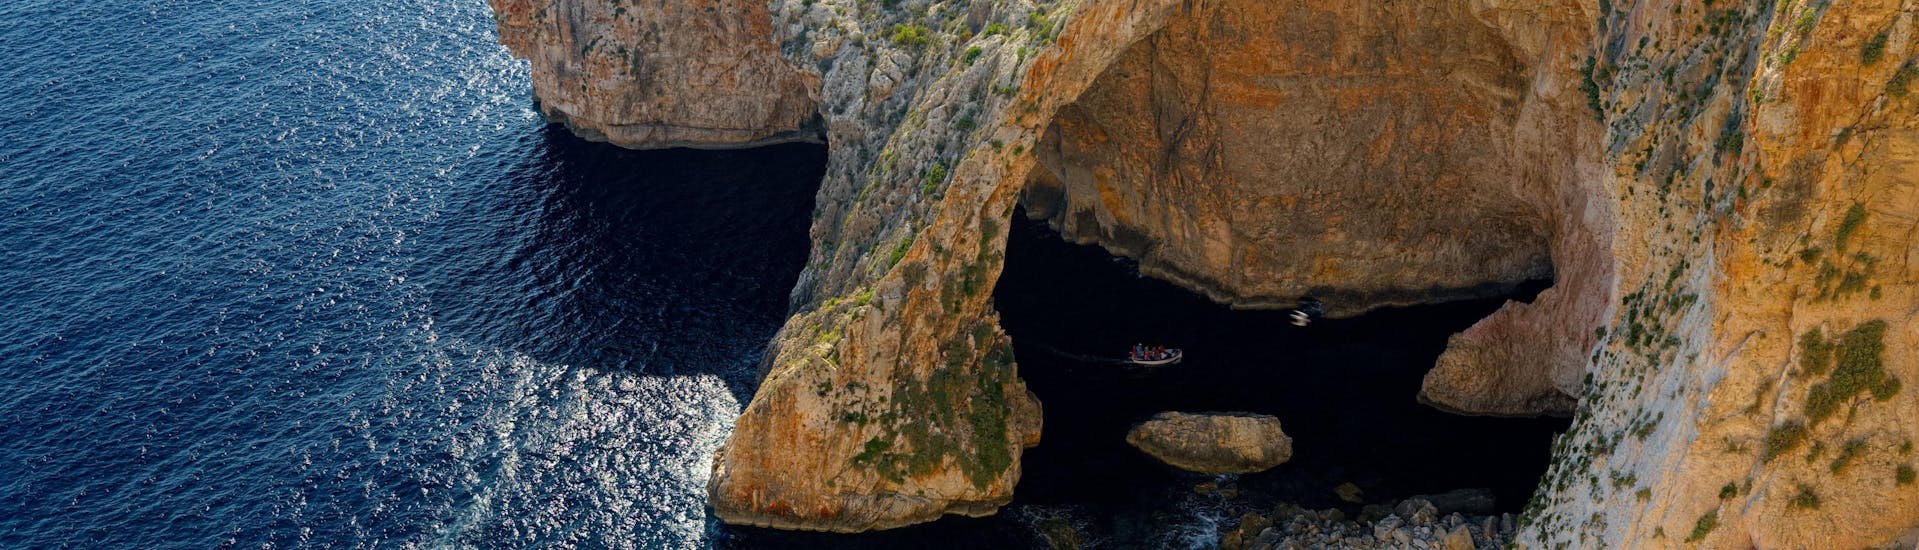 View of the Blue Grotto, in Gozo Malta, a popular destination for boat trips.